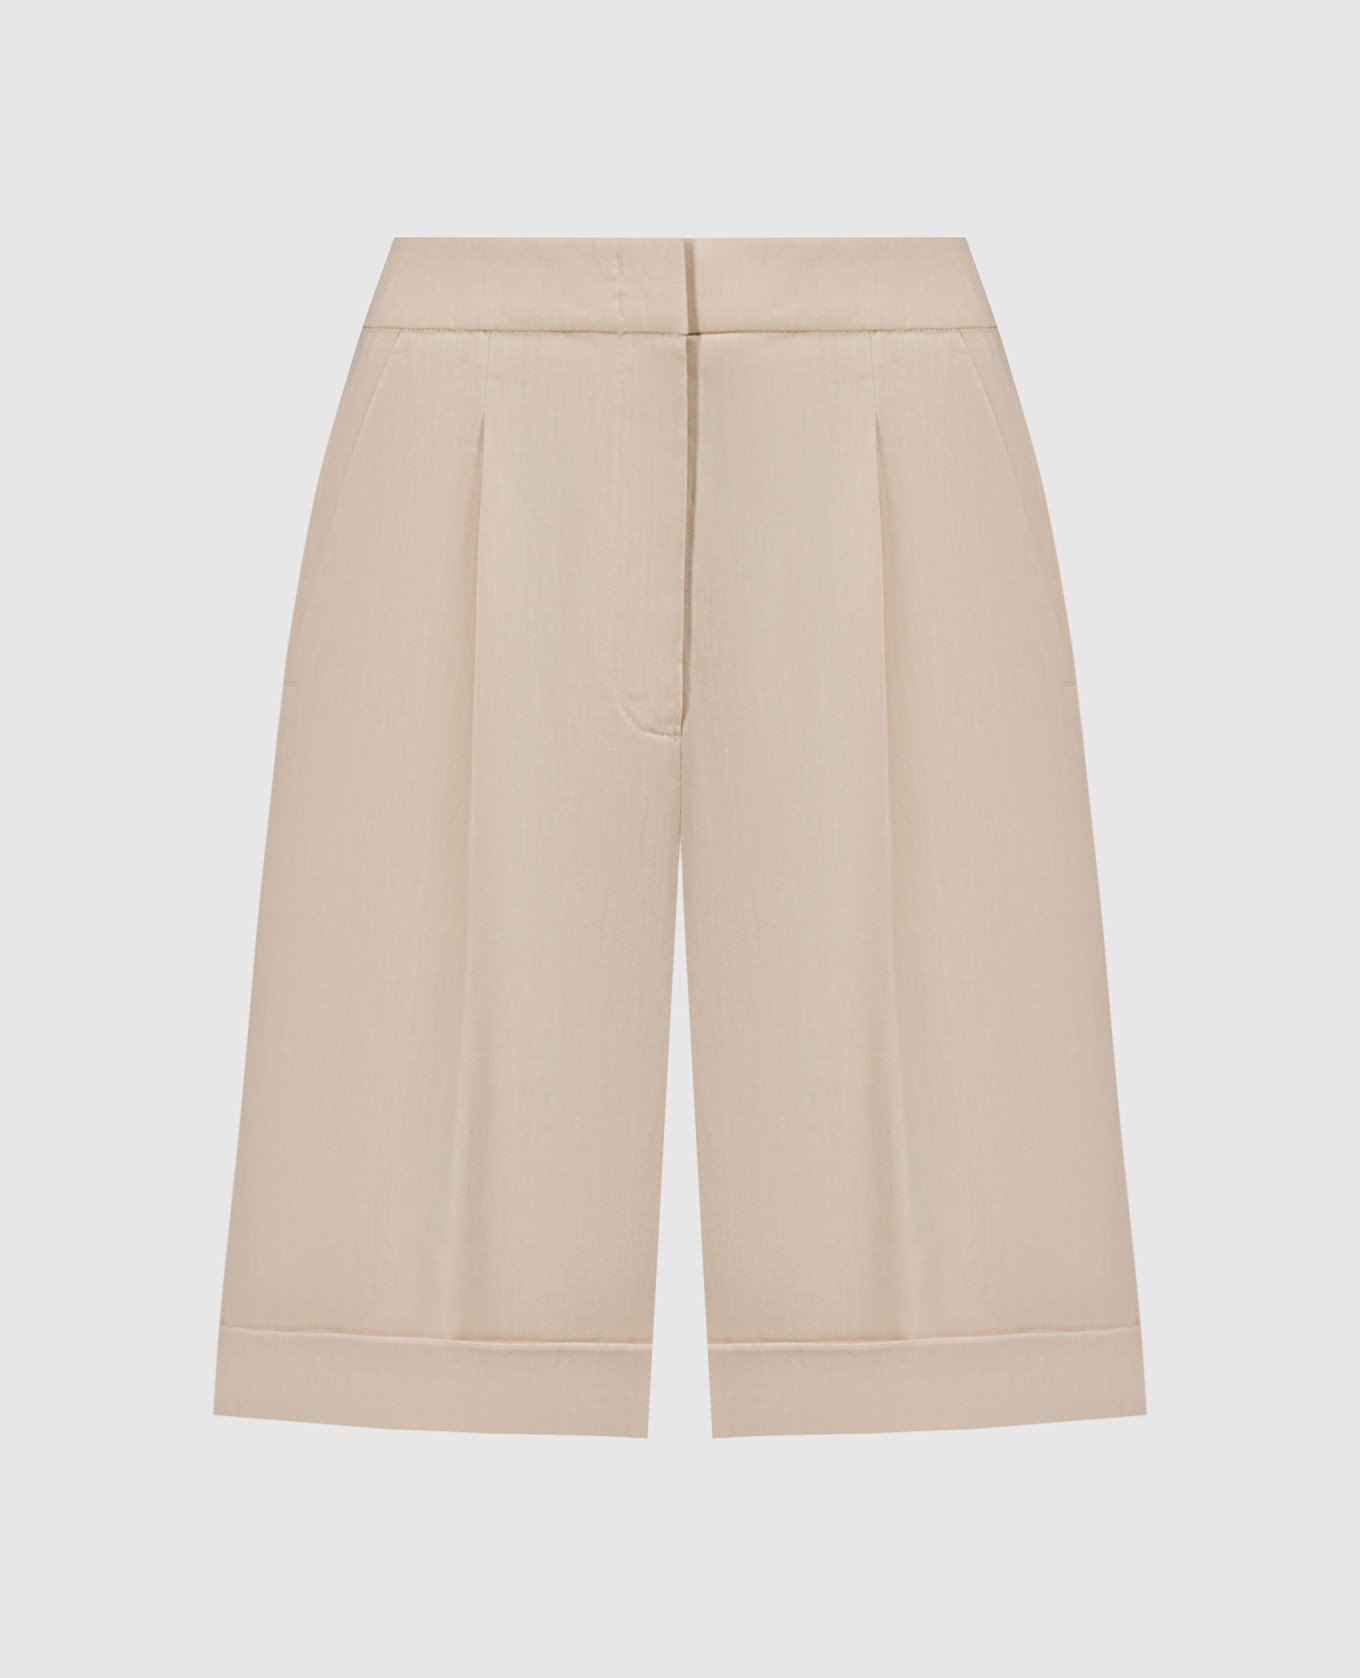 Beige shorts with linen